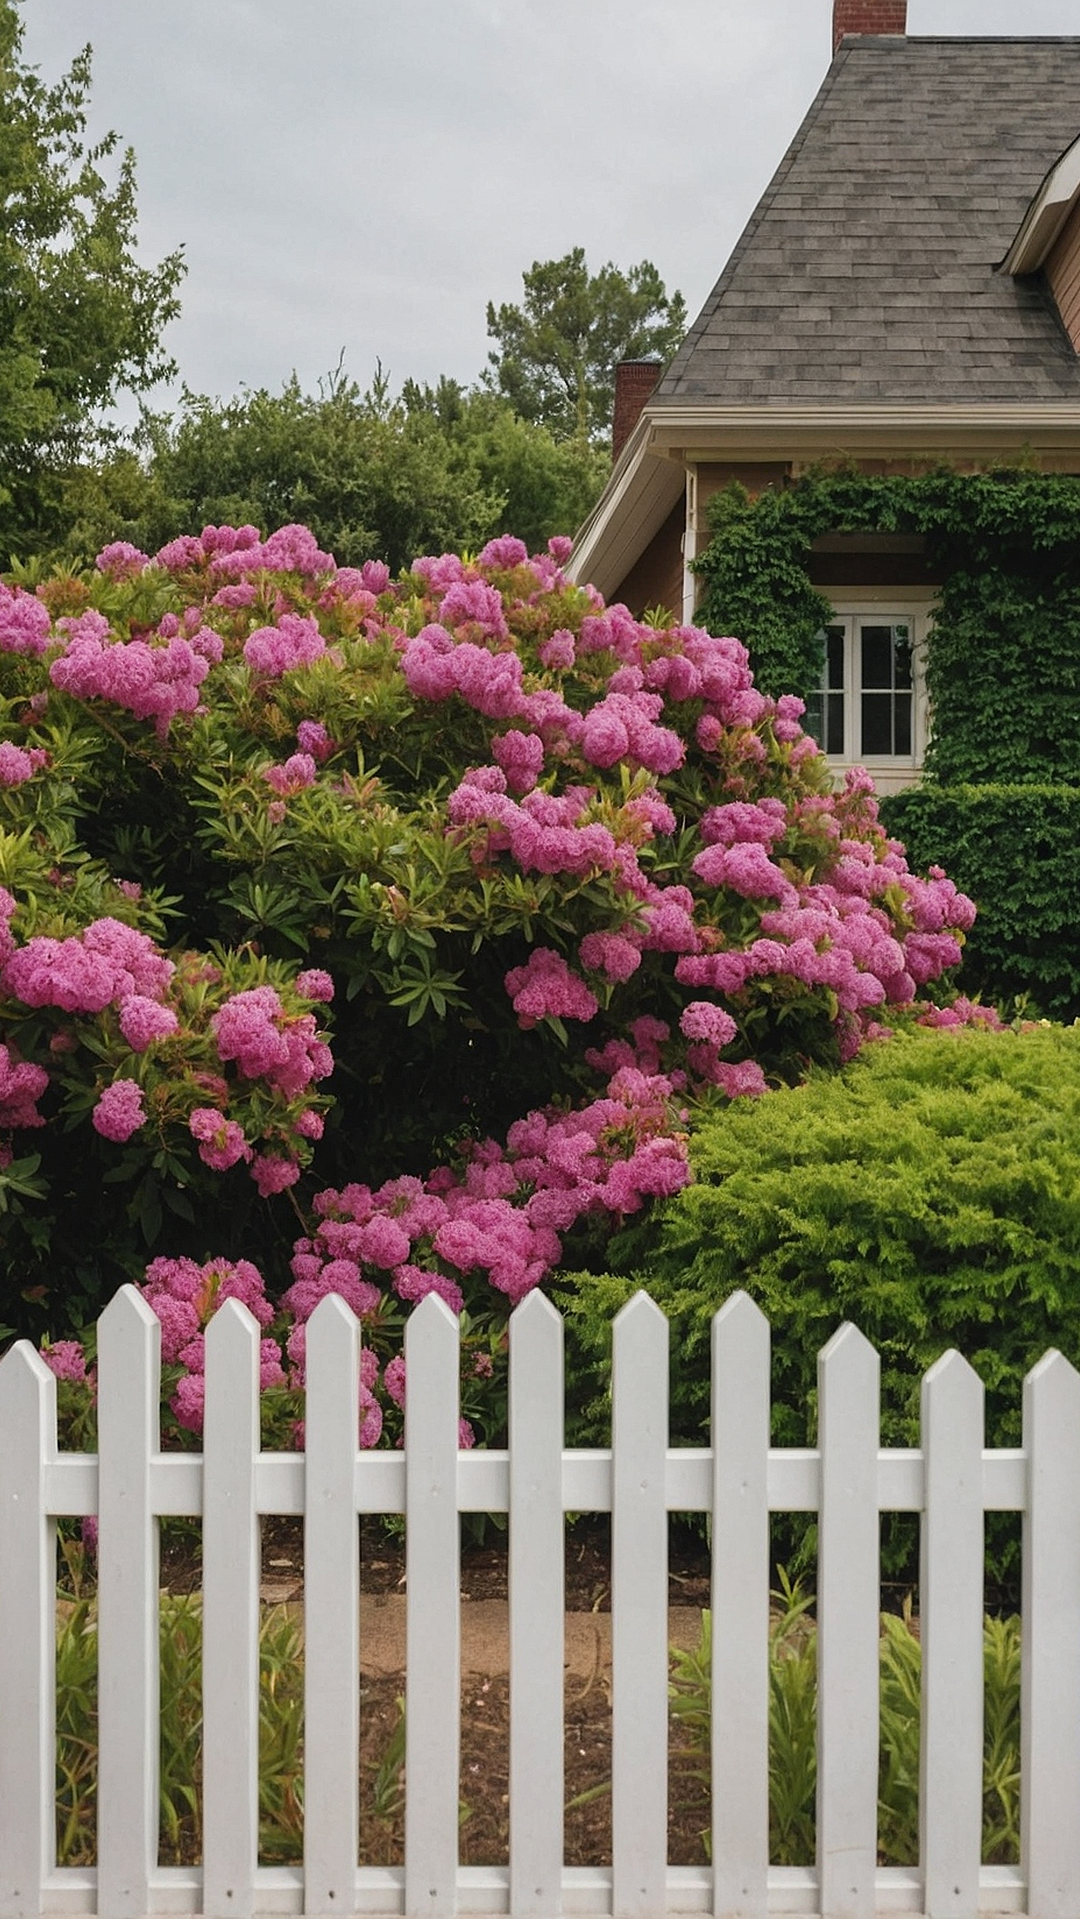 Cottage Style Design with Hydrangea Bushes